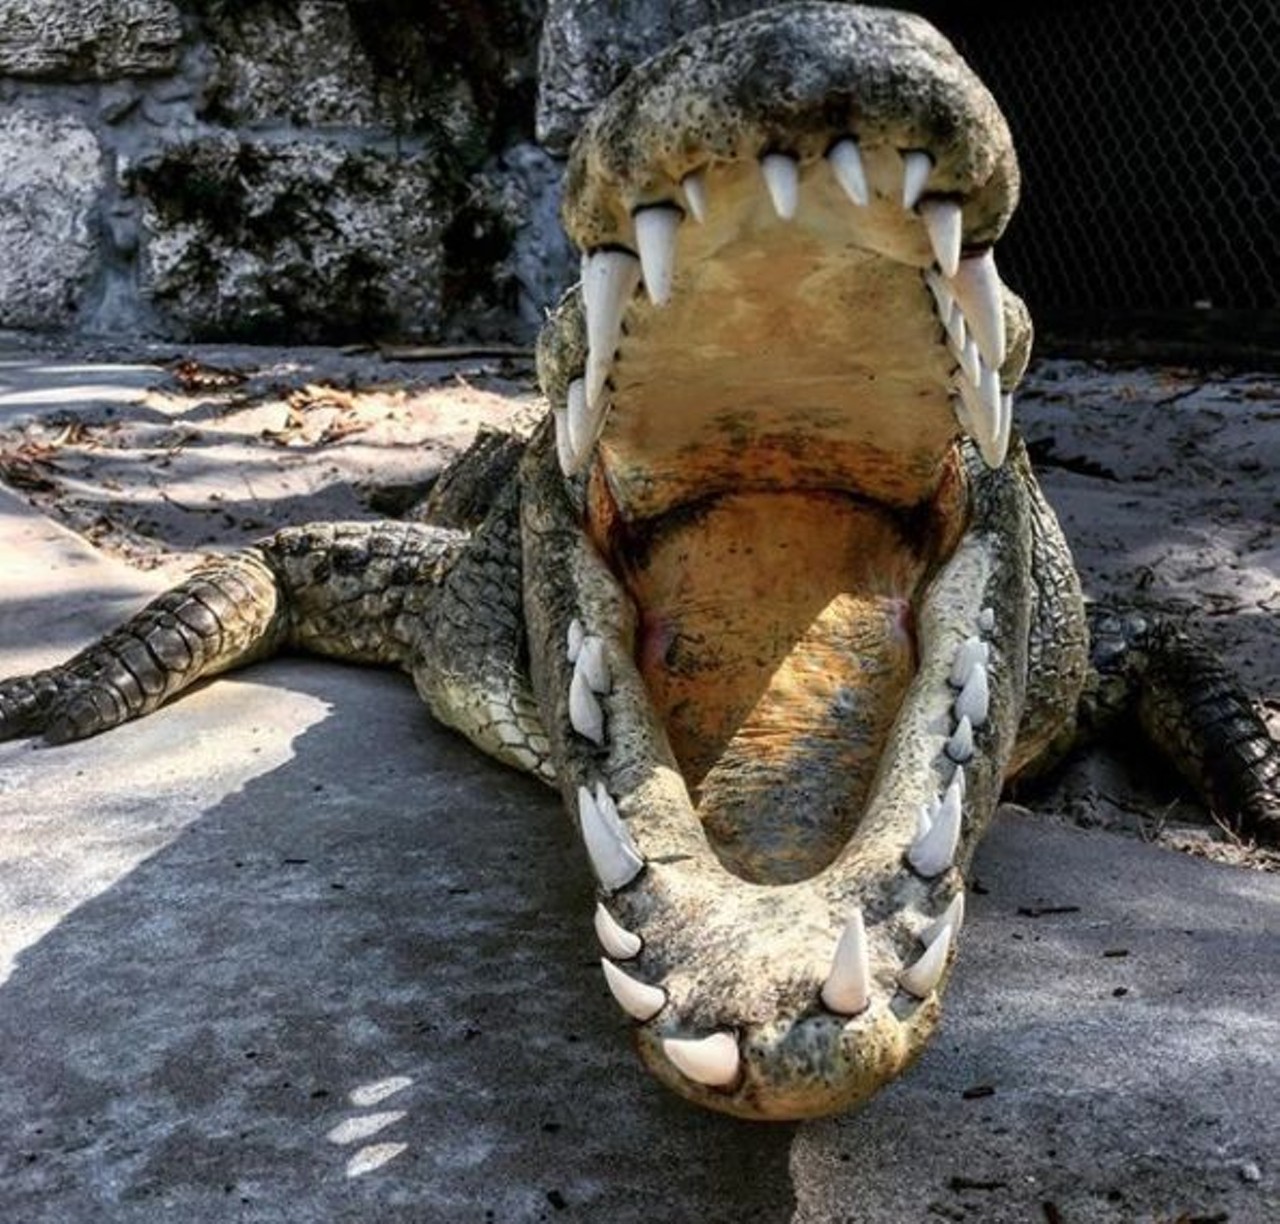 You should be following this Florida woman's gator-wrestling Instagram